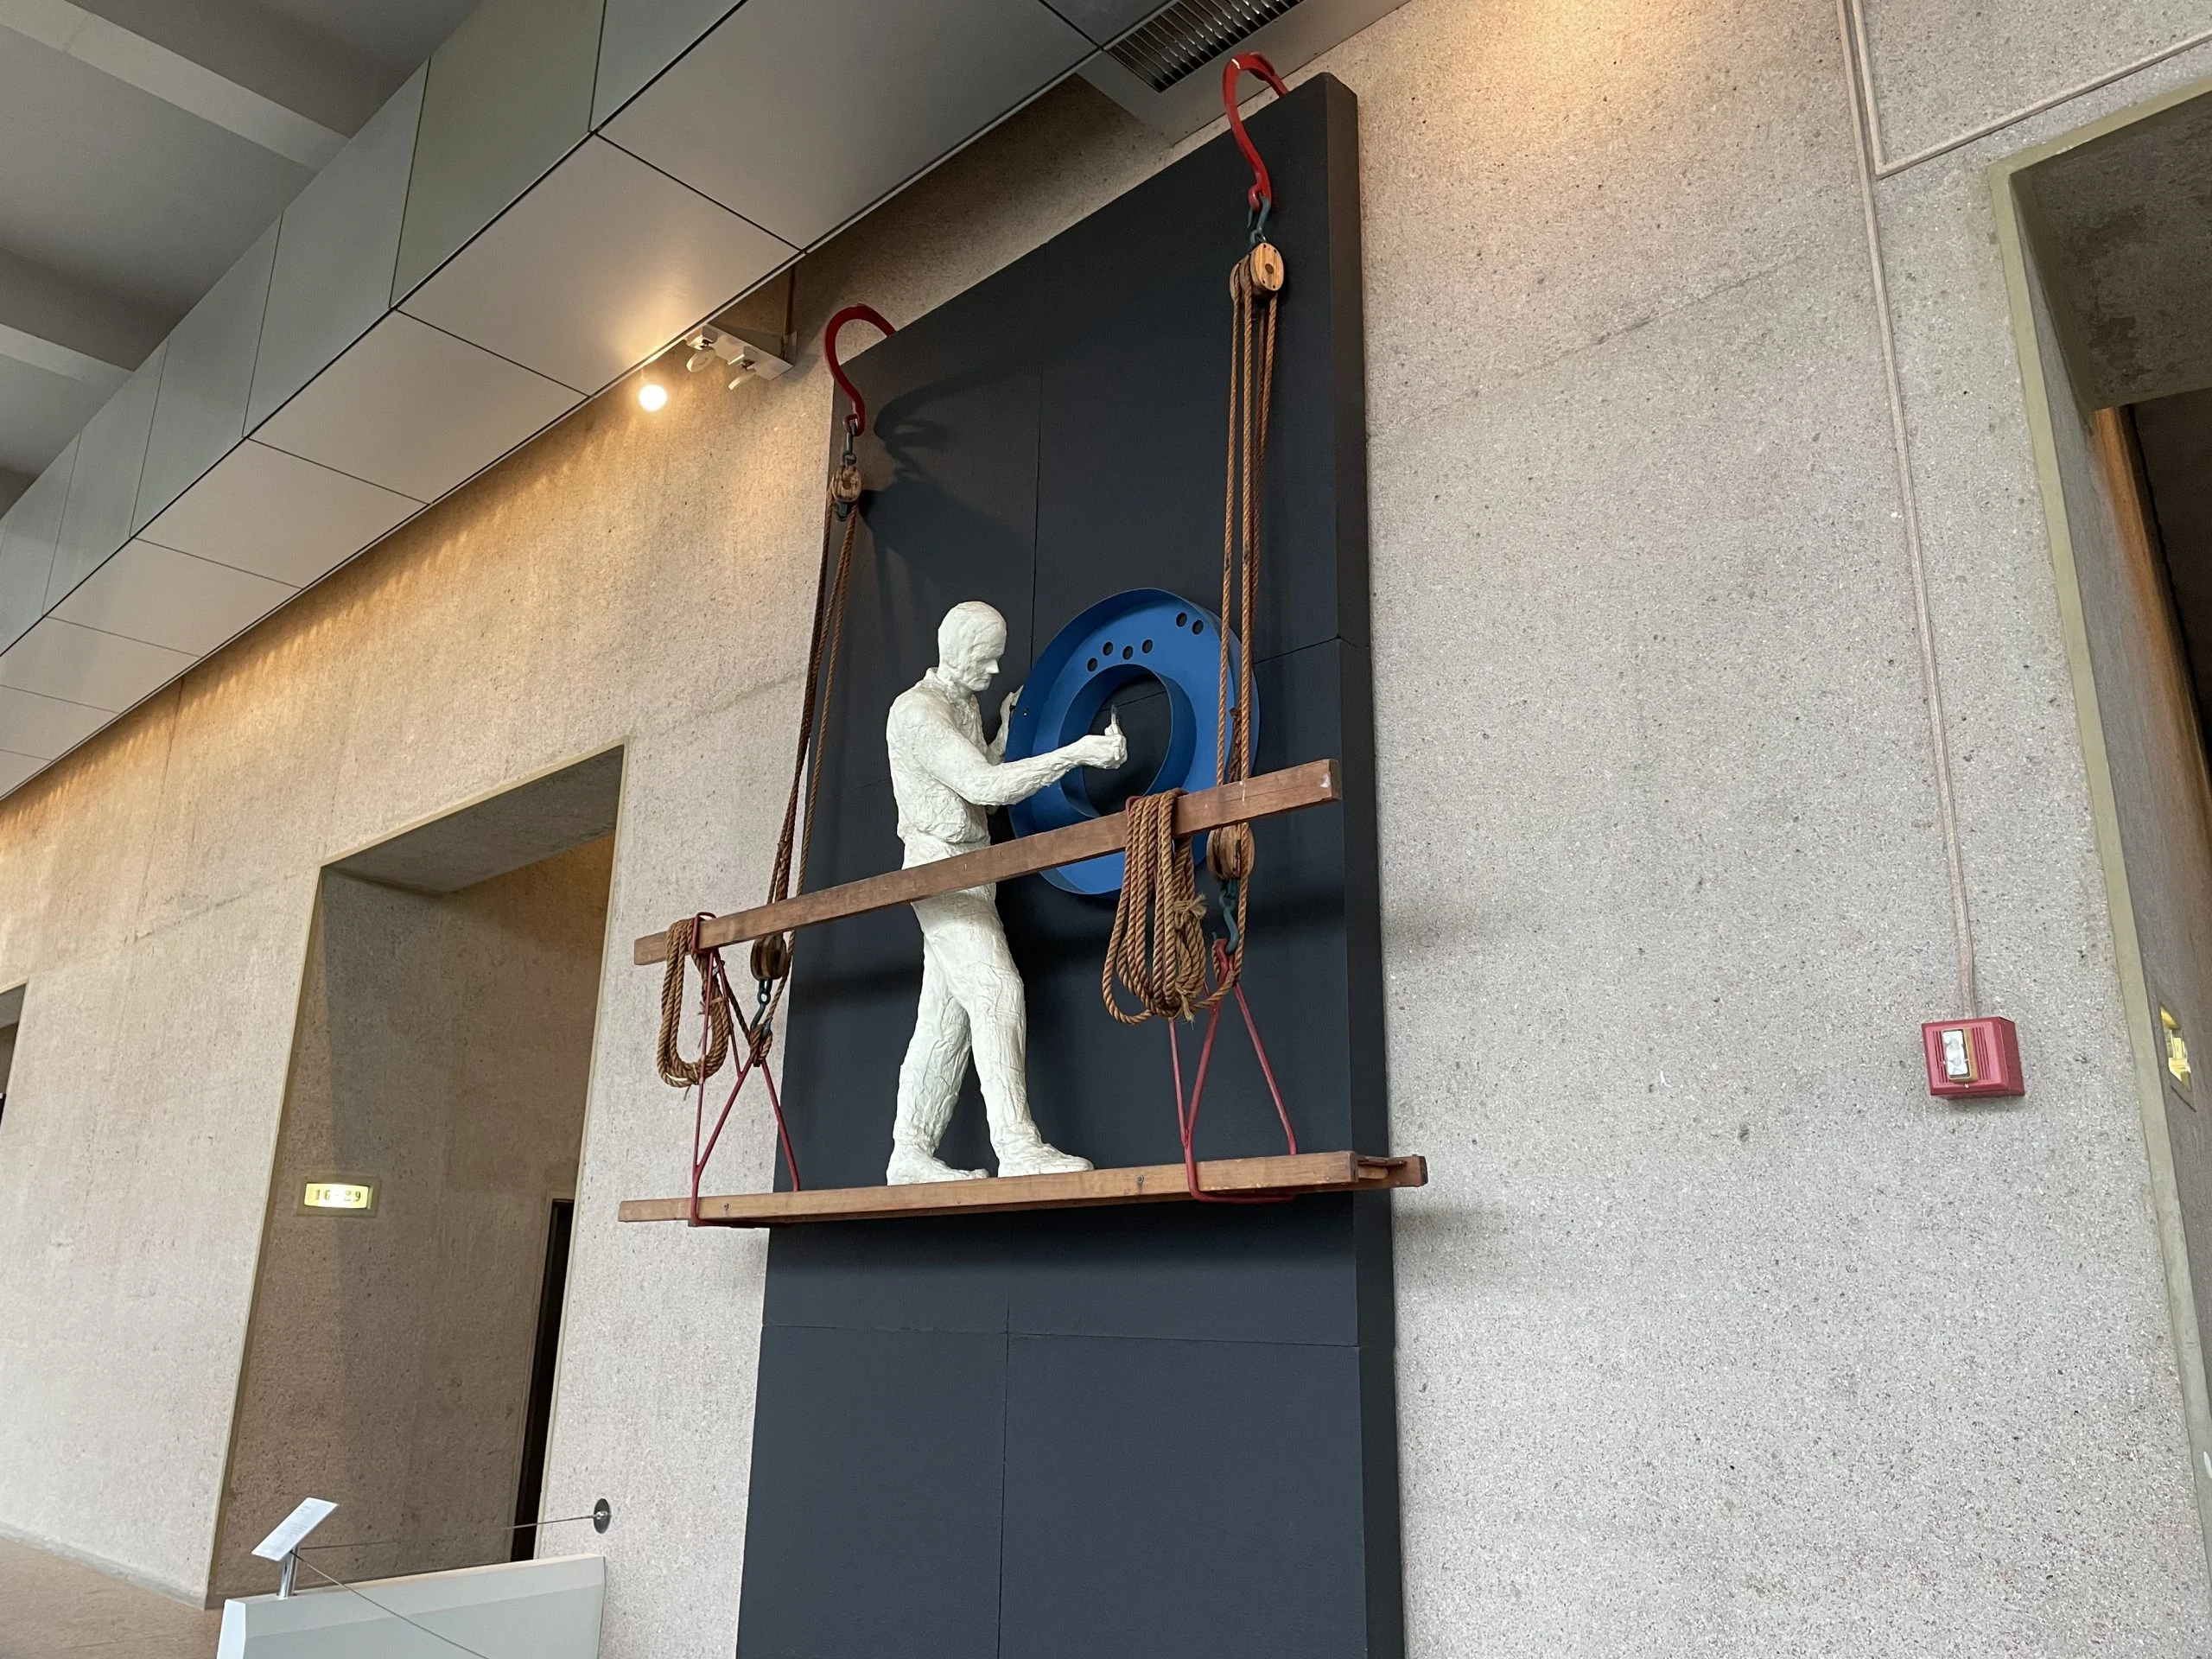 George Segal sculpture in the Corning Tower